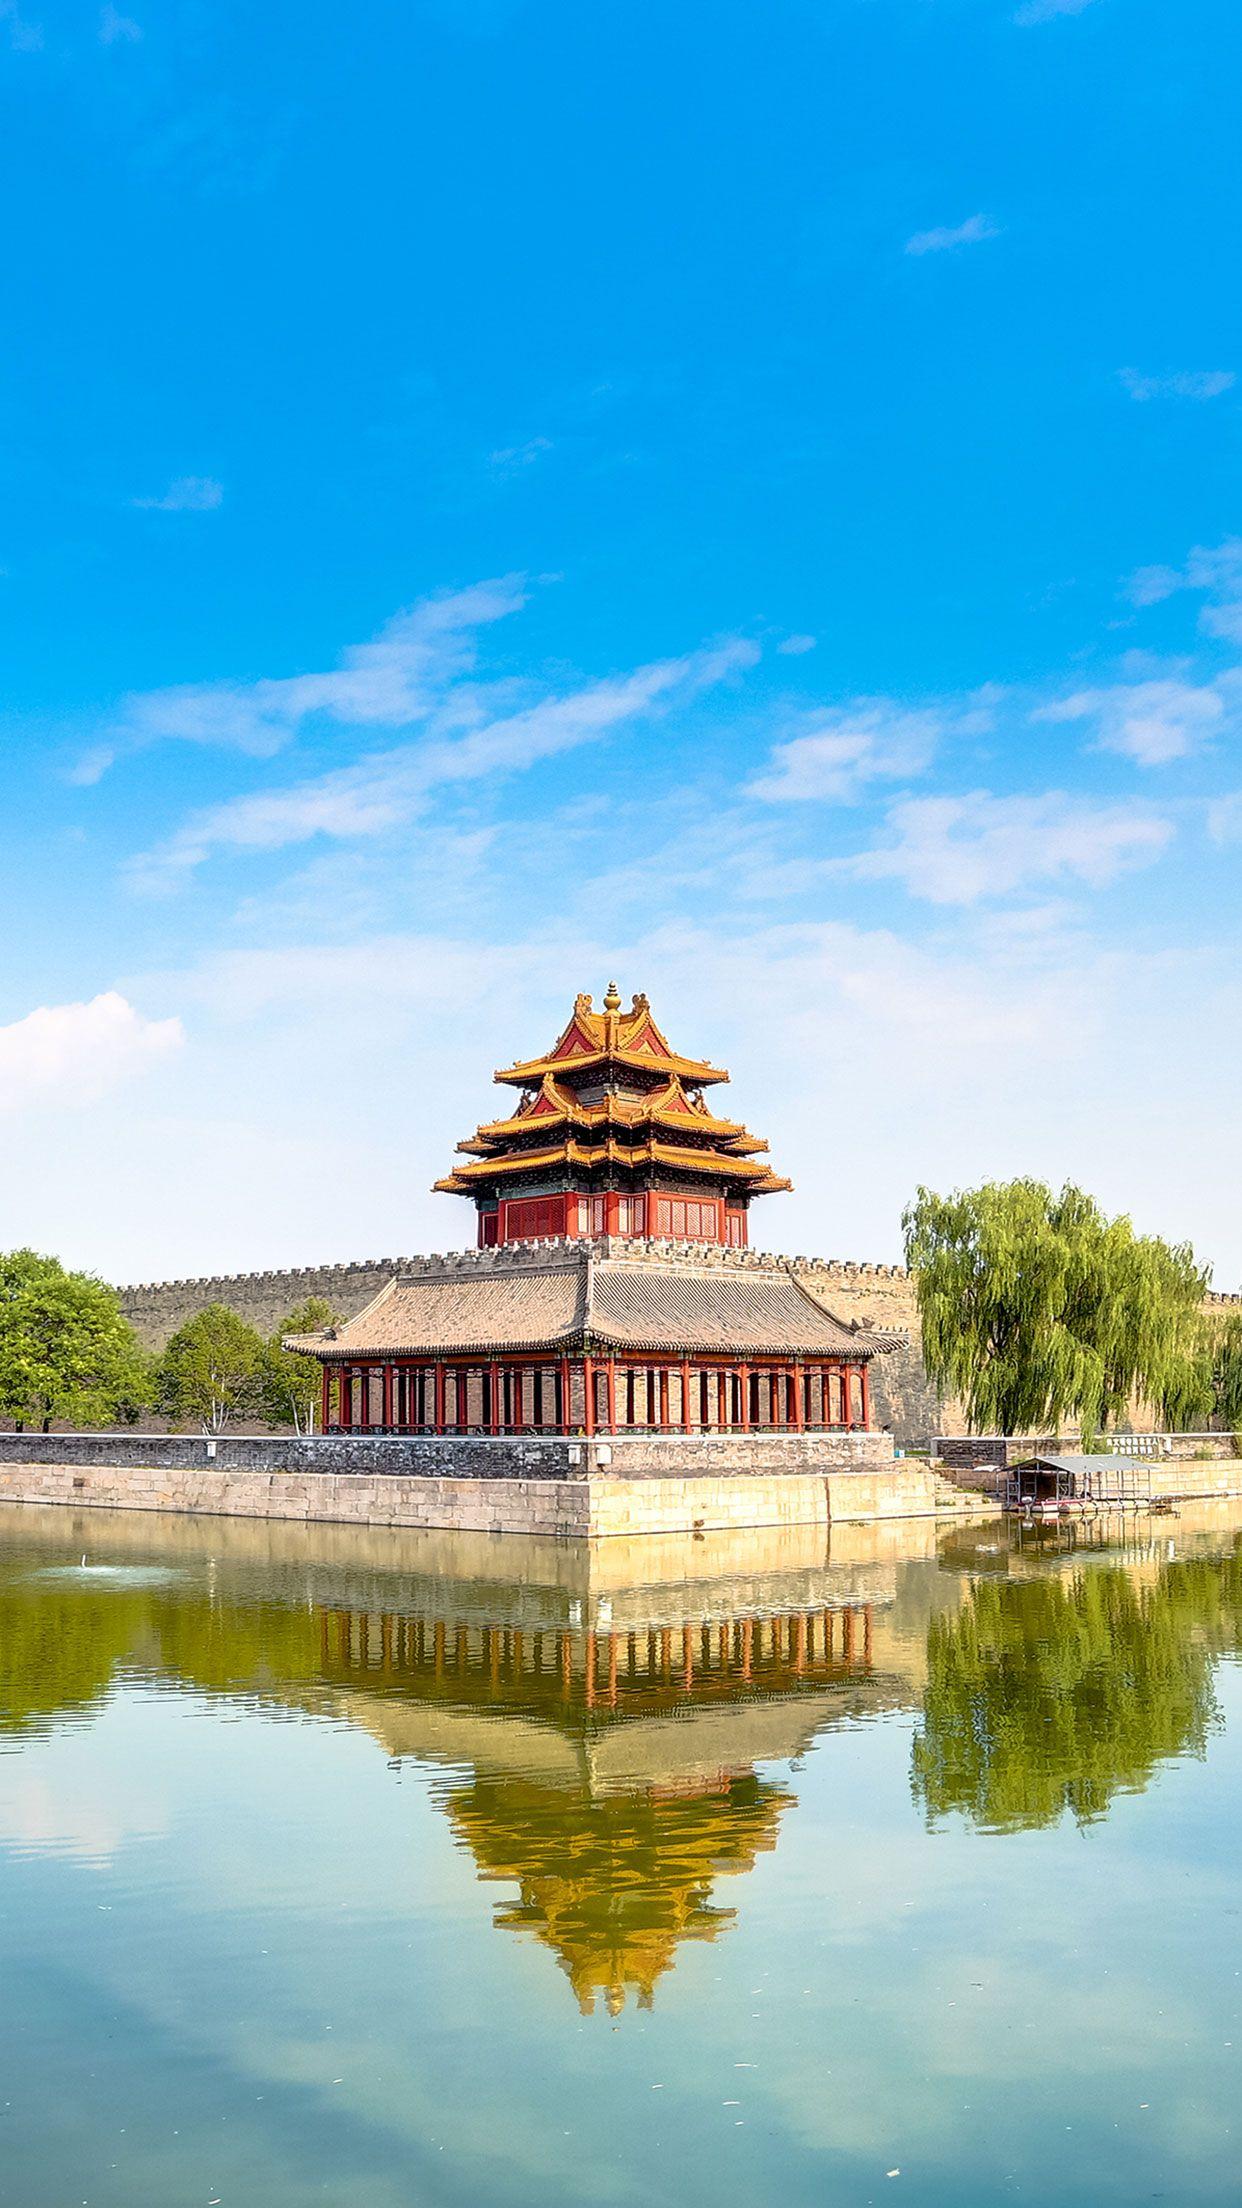 China building wallpaper for #iPhone and #Android #china #wallpaper